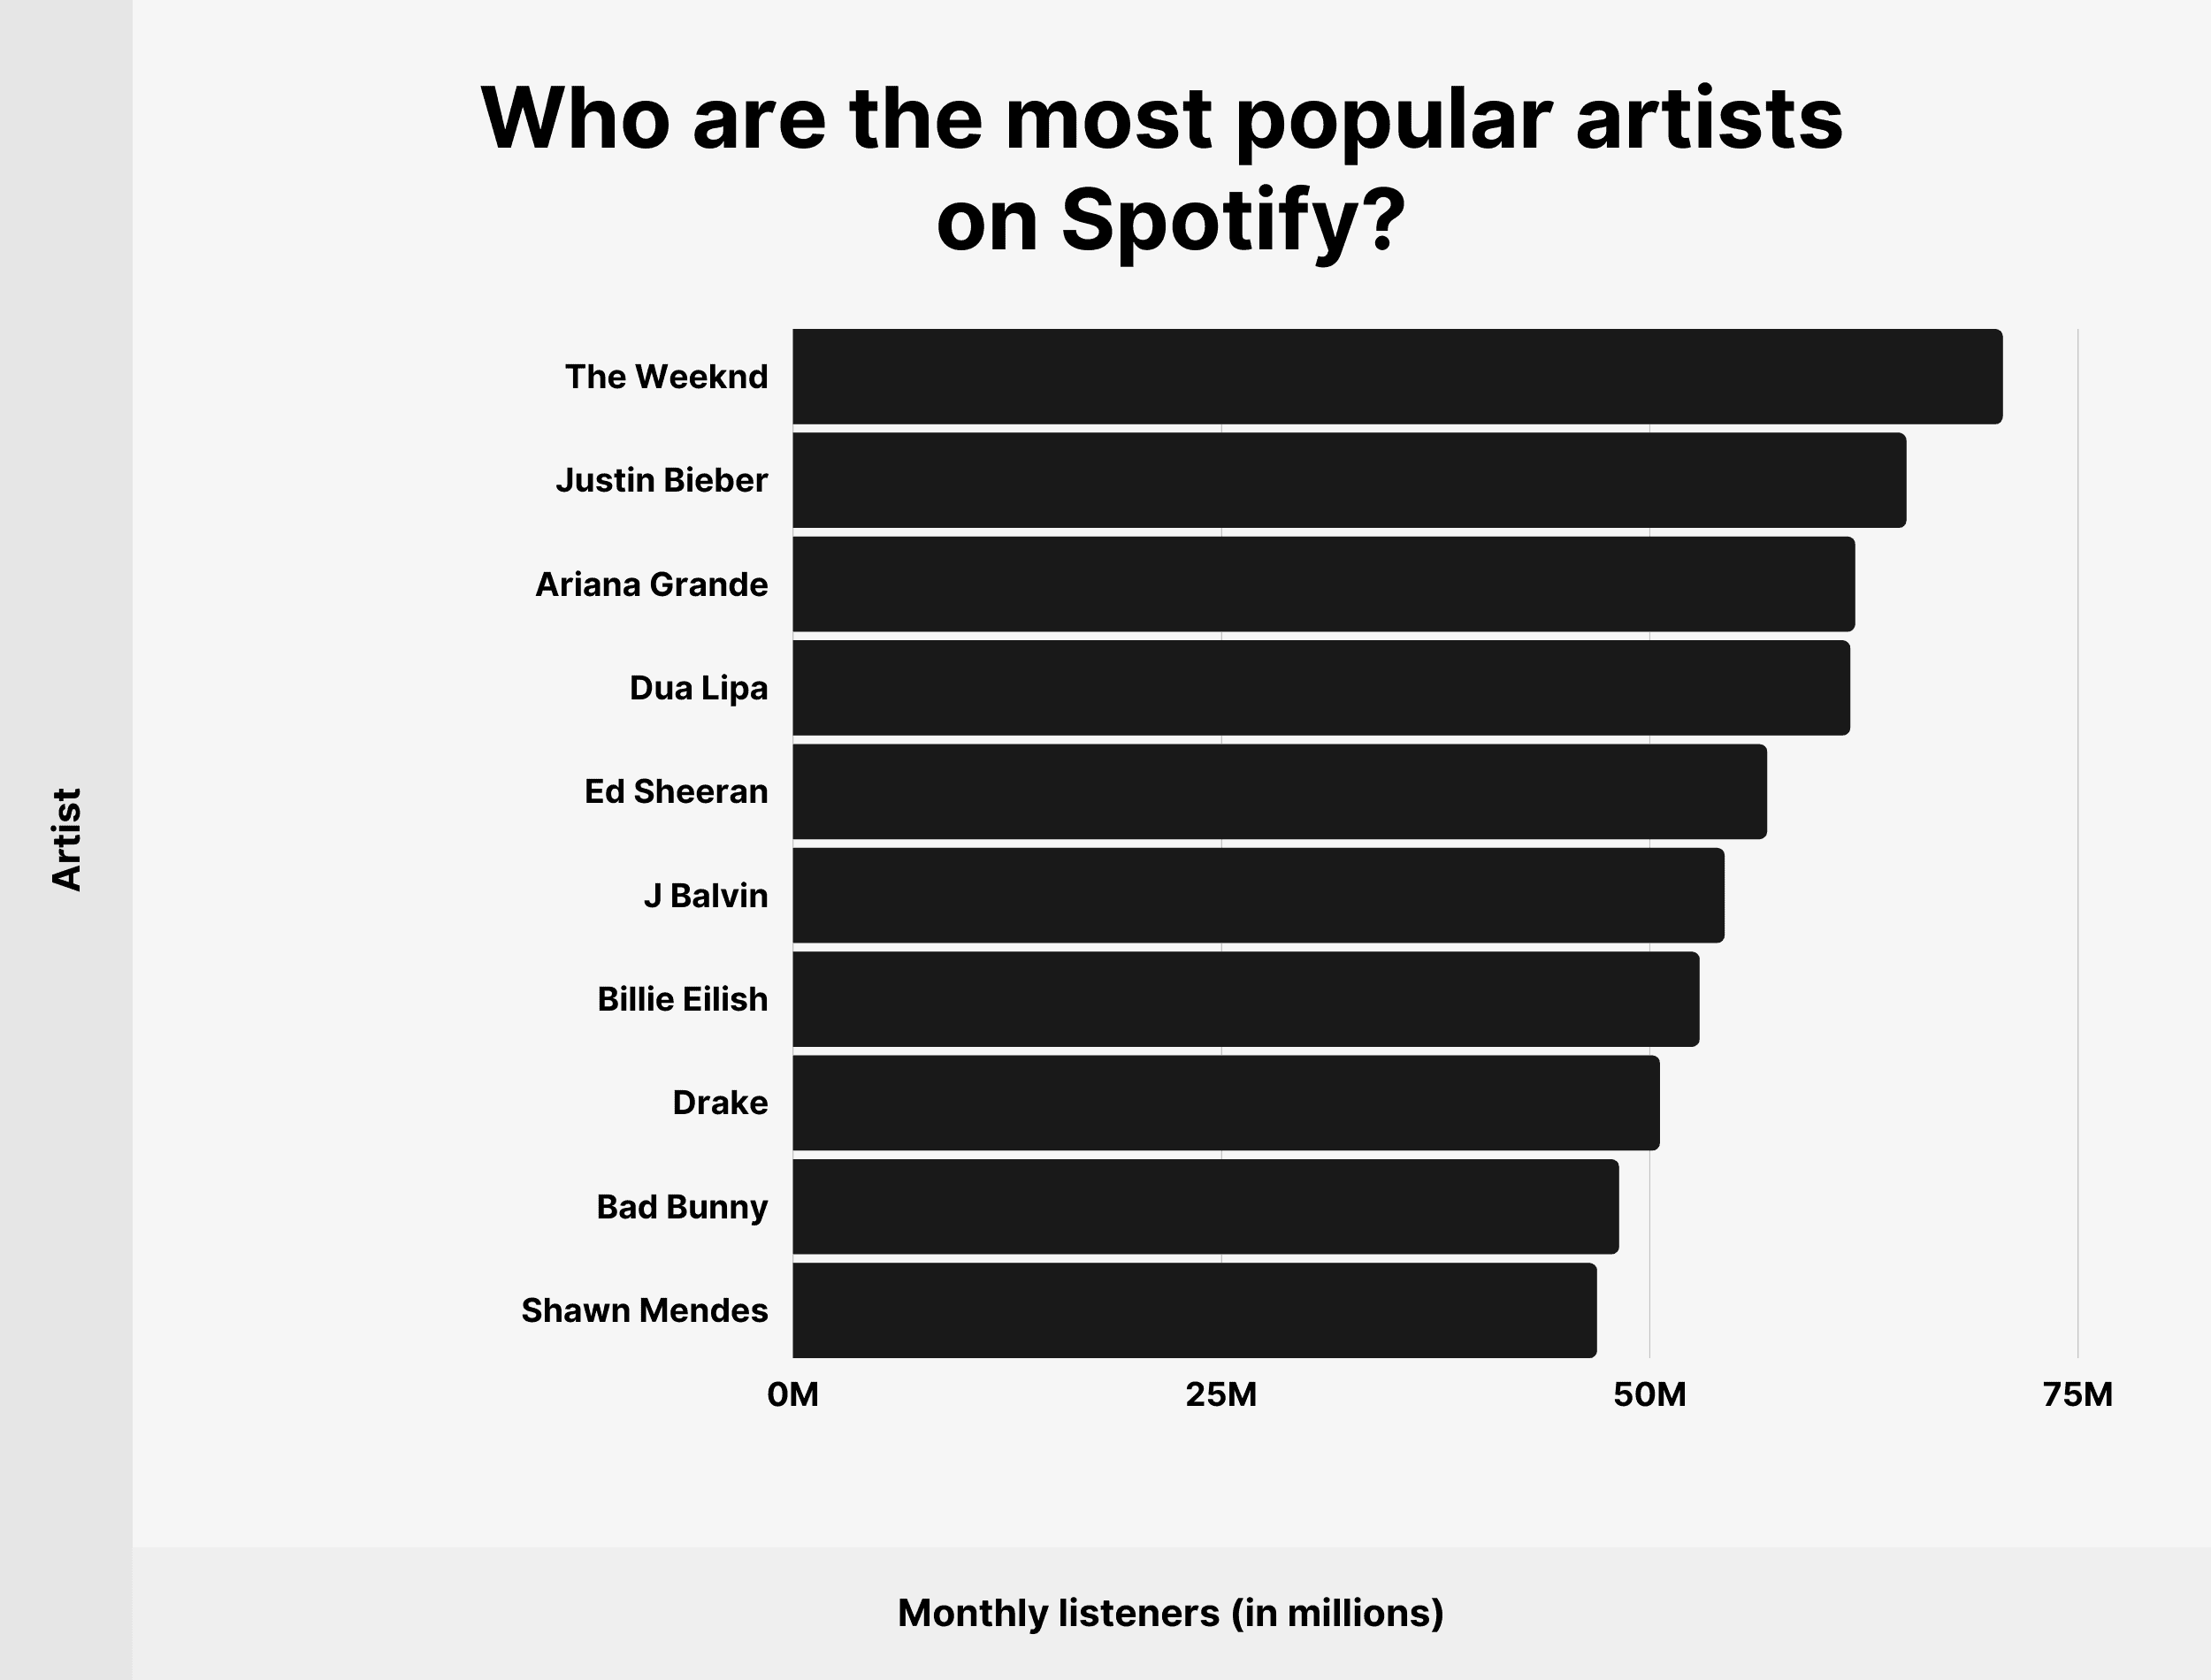 Who are the most popular artists on Spotify?